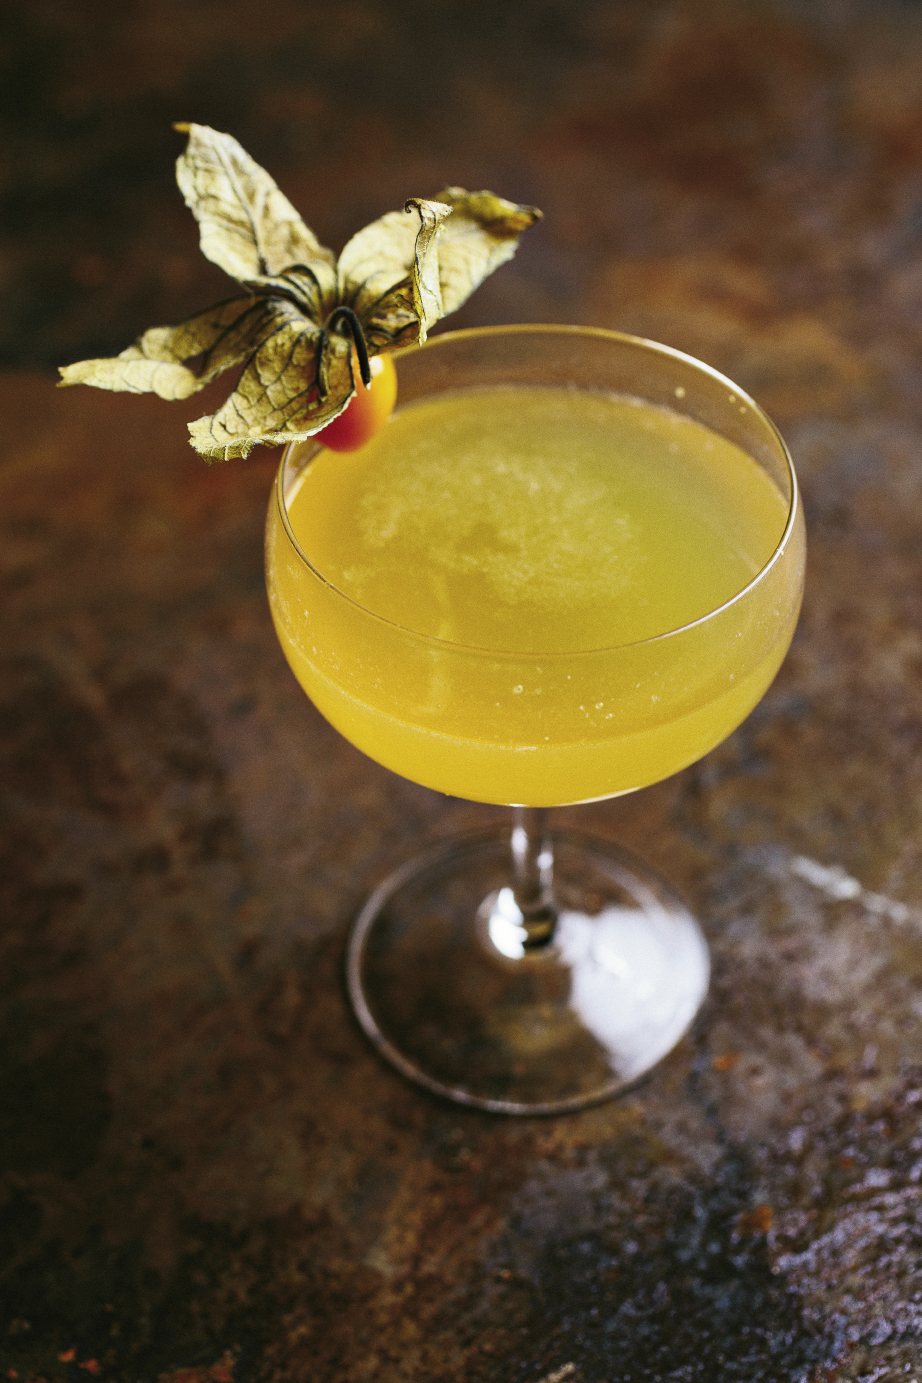 The Gin Joint is renowned  for its craft cocktails, and bartender Jamie Bolt mixed up some special concoctions for the appreciative F&amp;B crowd. This gorgeous cocktail, dubbed “The Death Grip,” is slightly tart and sweet with St. George Terroir Gin and apricot eau-de-vie. Get the recipe at charlestonmag.com/LeadingLadies.